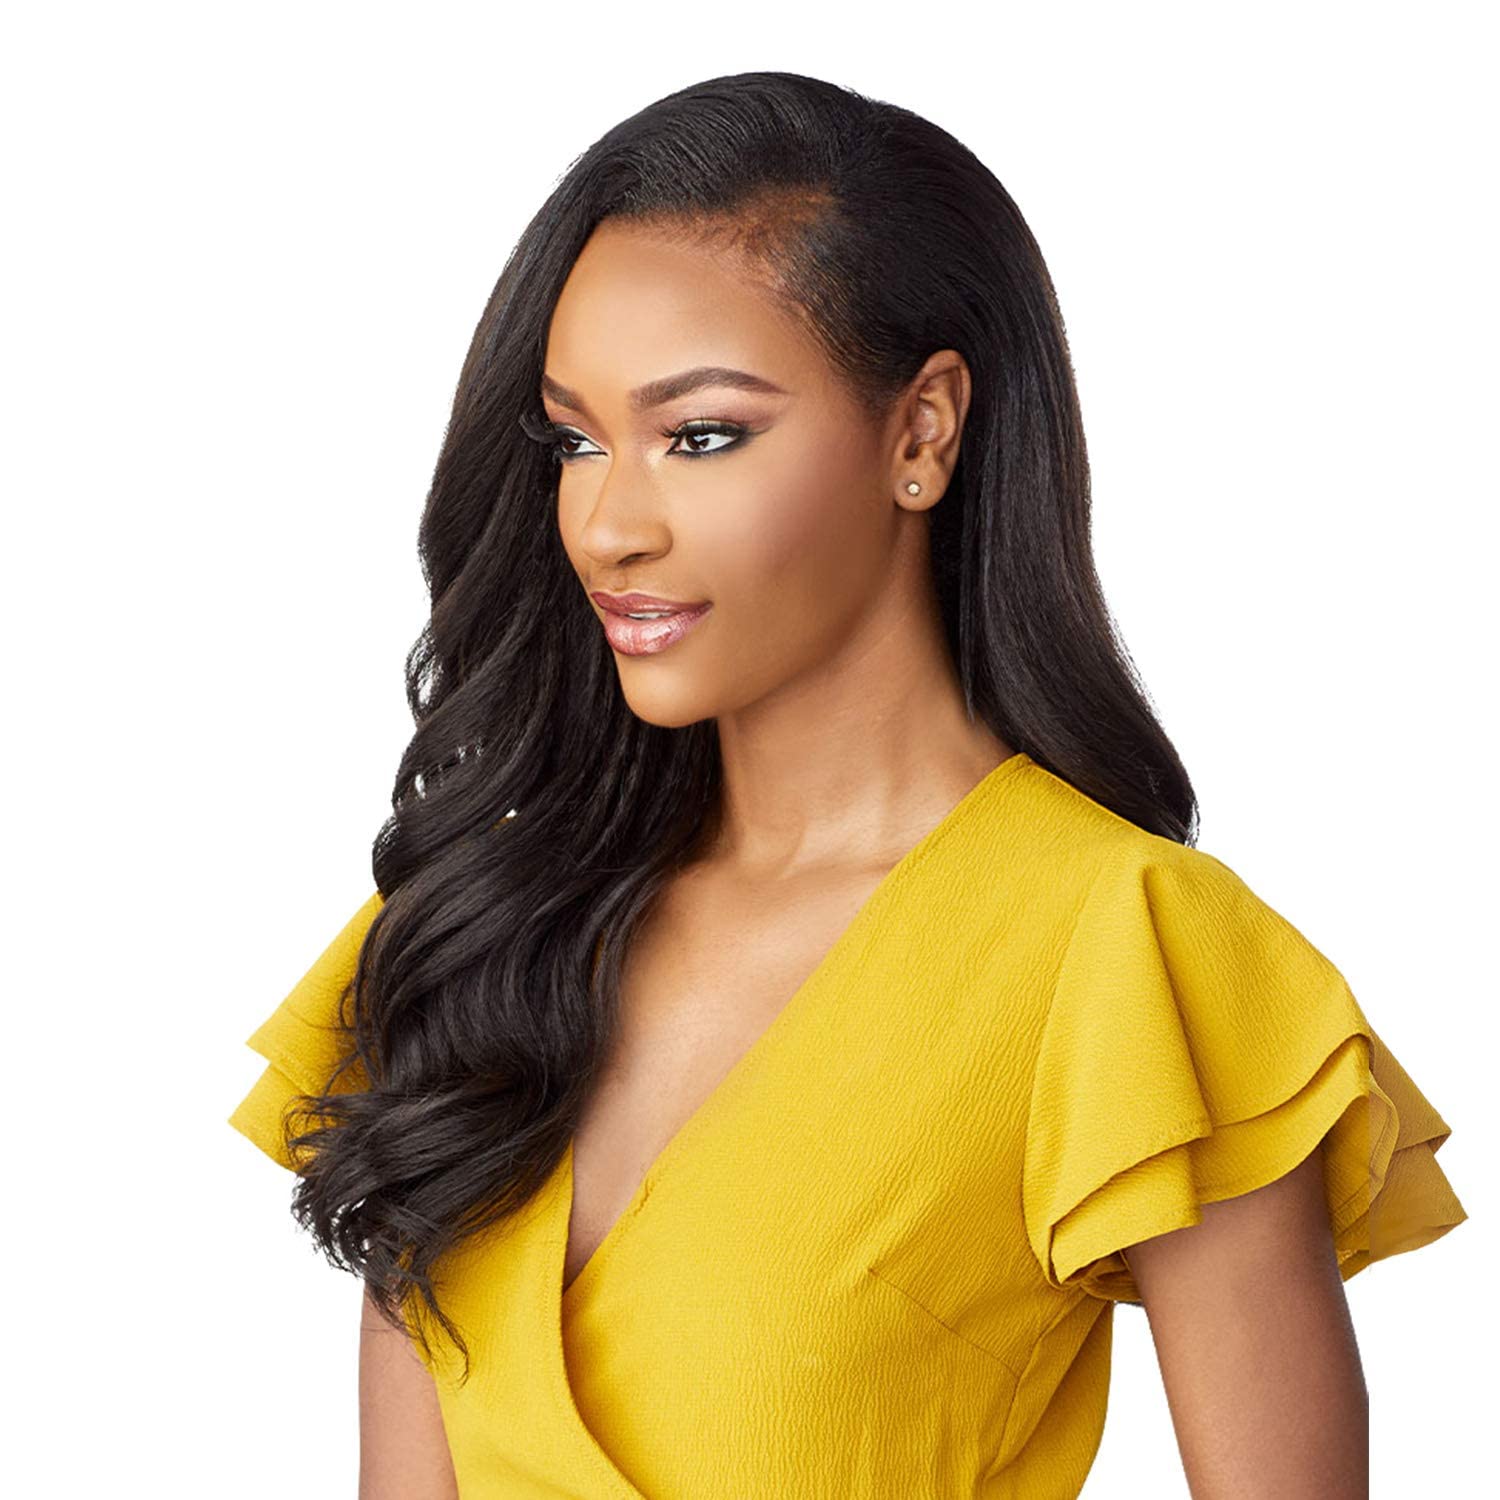 Sensationnel hair extensions - Instant weave drawstring cap 004 Find Your New Look Today!